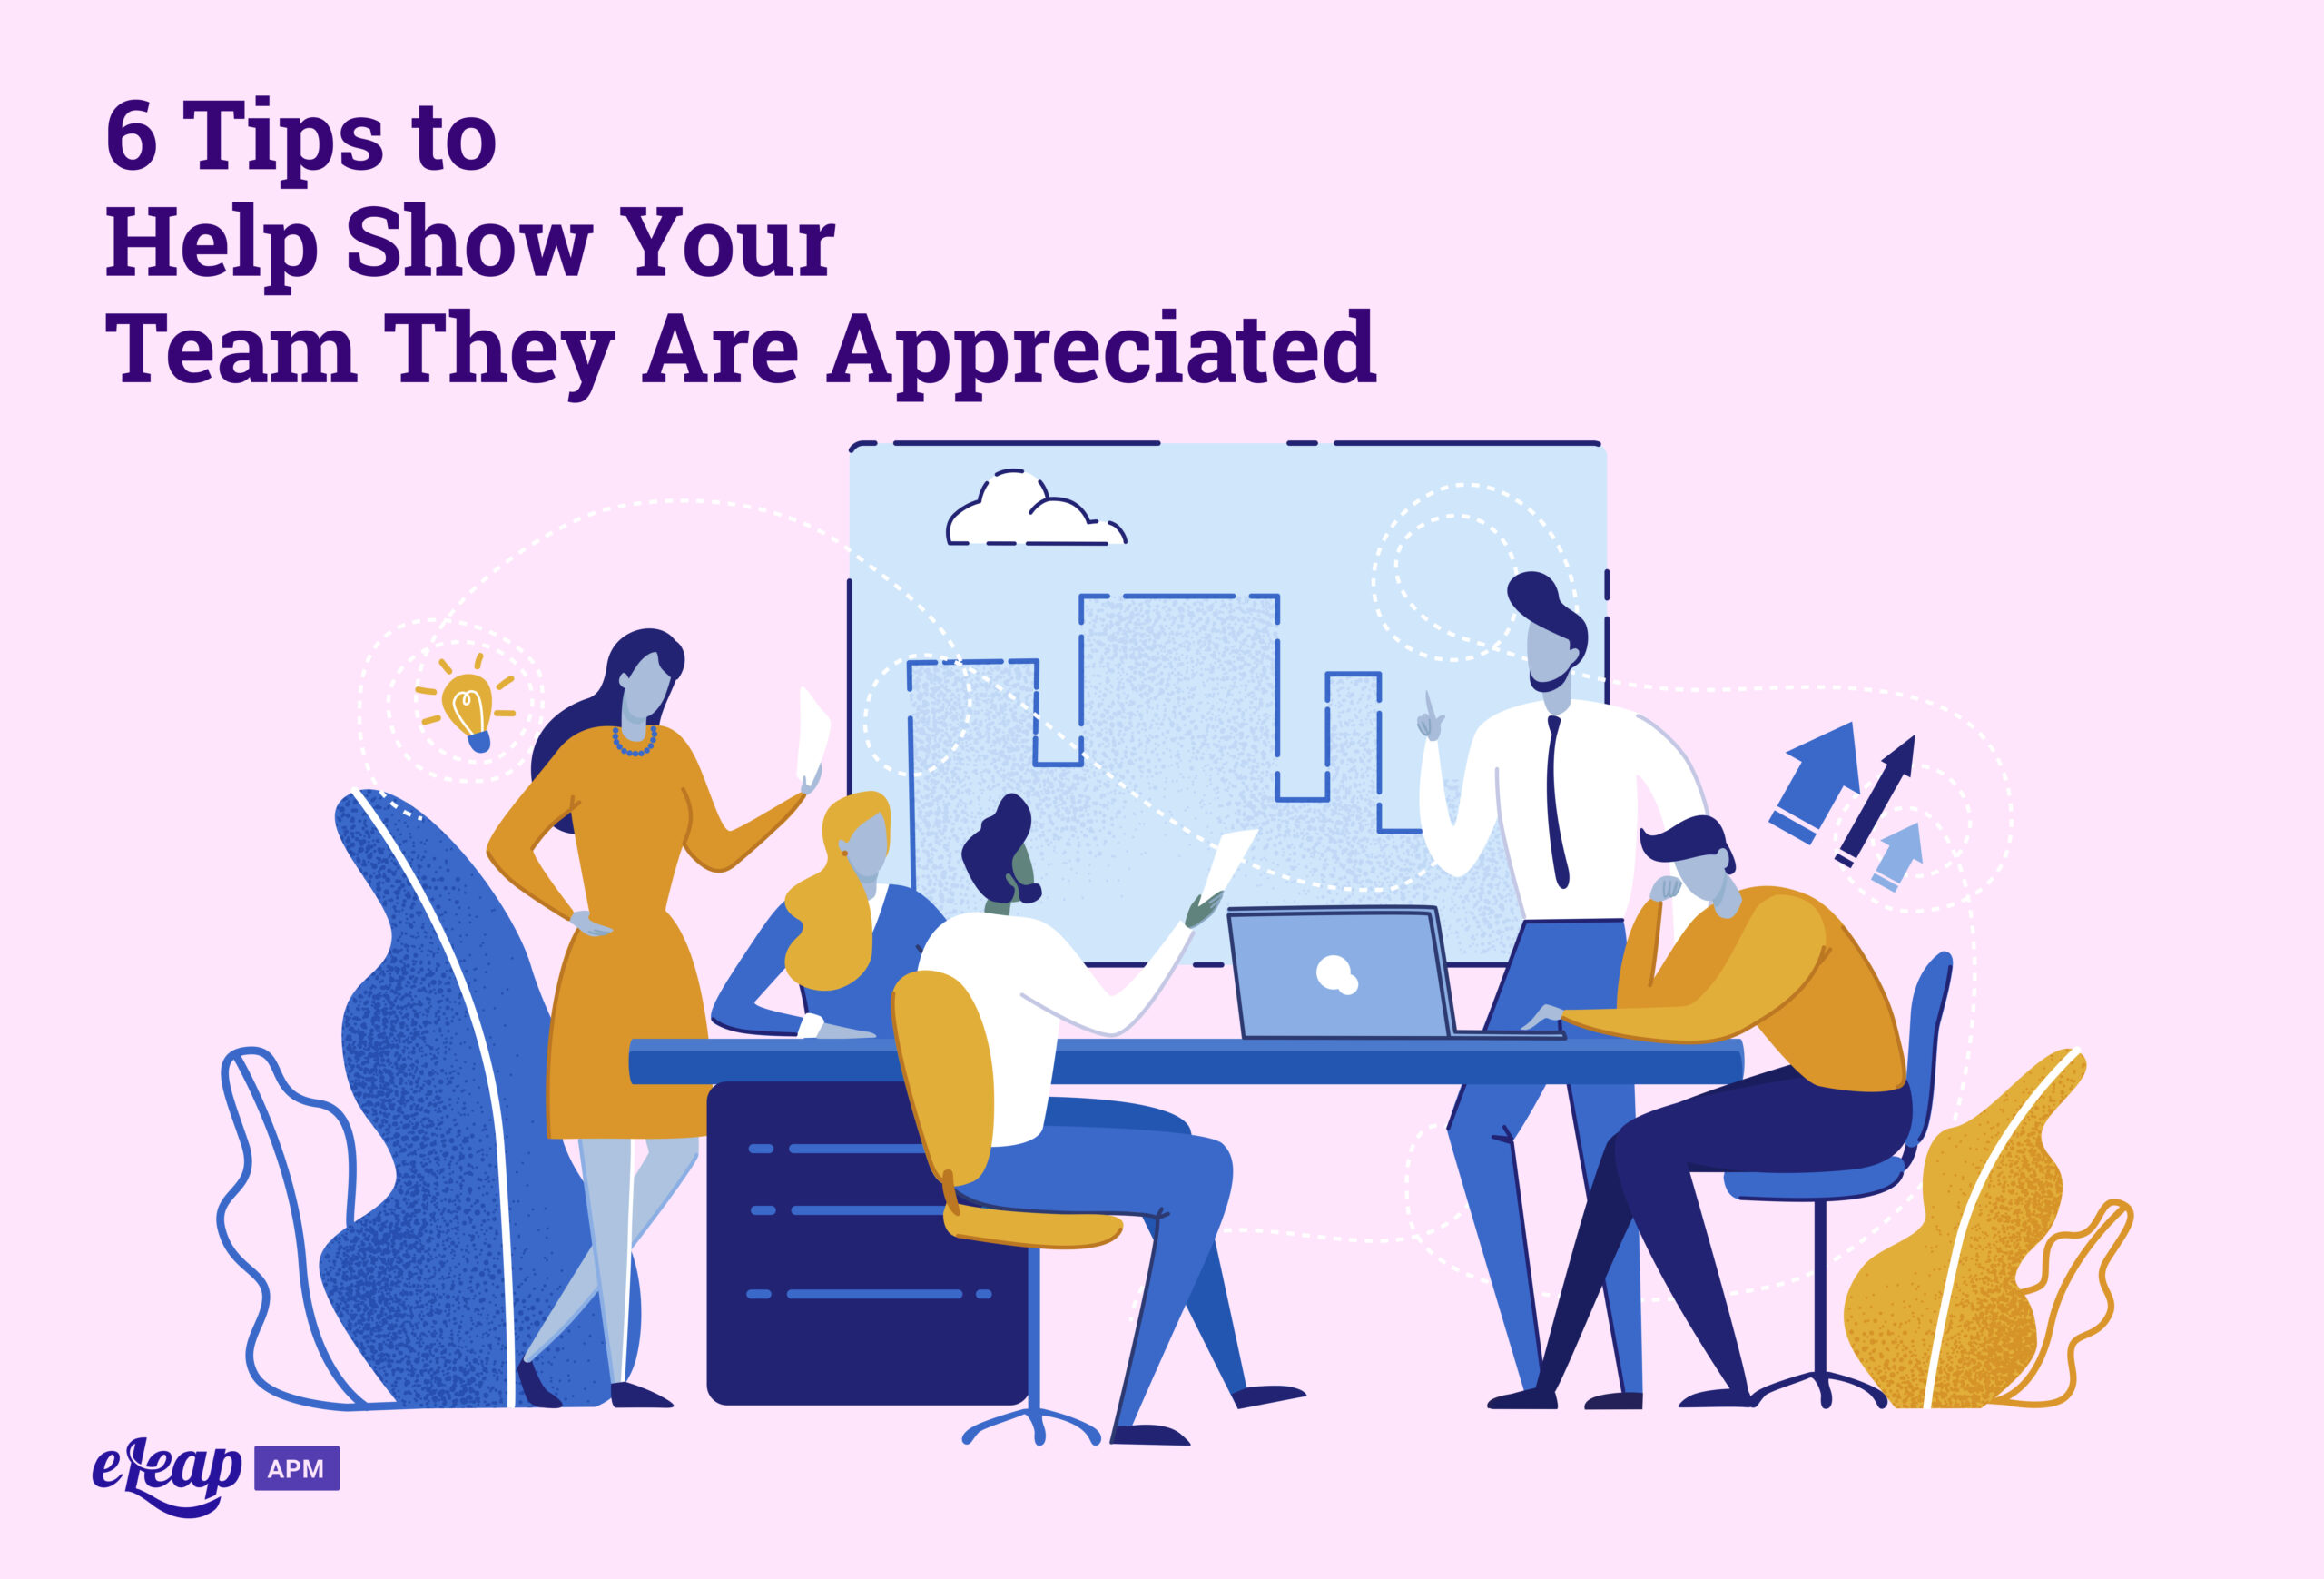 6 Tips to Help Show Your Team They Are Appreciated